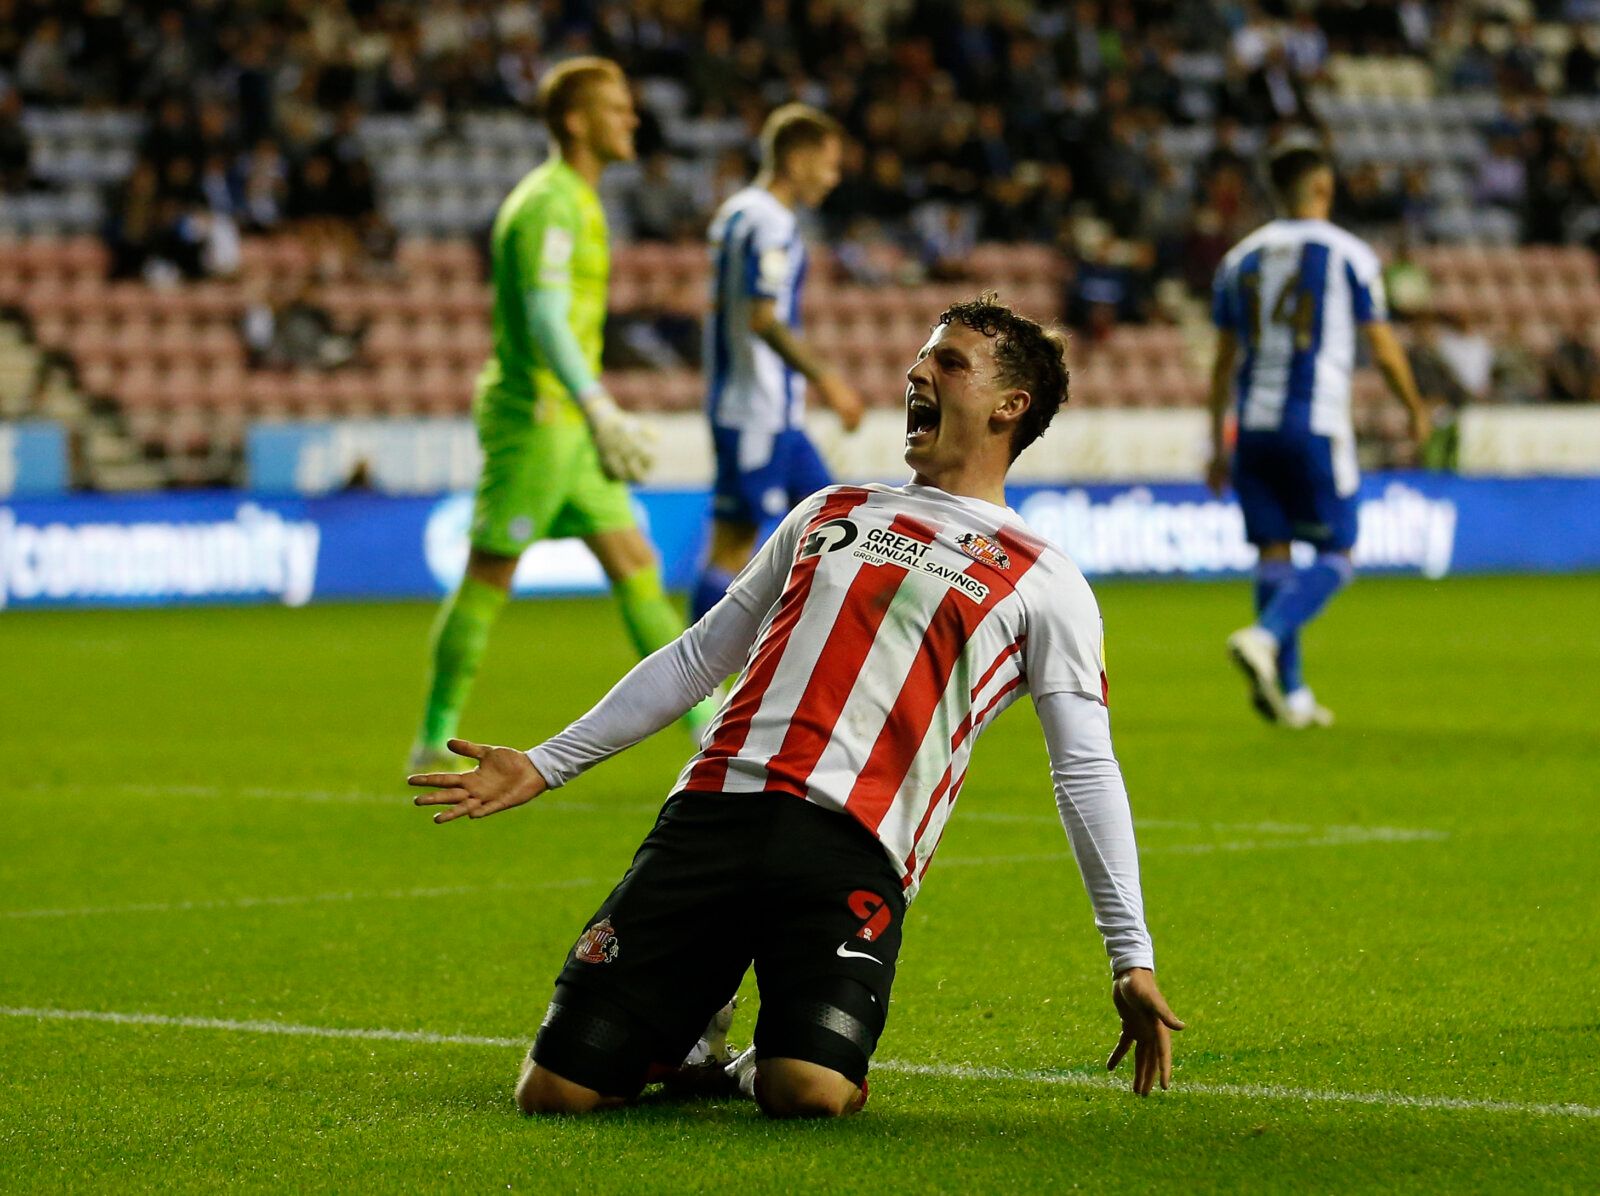 Soccer Football - Carabao Cup - Third Round - Wigan Athletic v Sunderland - DW Stadium, Wigan, Britain - September 21, 2021 Sunderland's Nathan Broadhead celebrates scoring their first goal Action Images/Craig Brough EDITORIAL USE ONLY. No use with unauthorized audio, video, data, fixture lists, club/league logos or 'live' services. Online in-match use limited to 75 images, no video emulation. No use in betting, games or single club /league/player publications.  Please contact your account repre